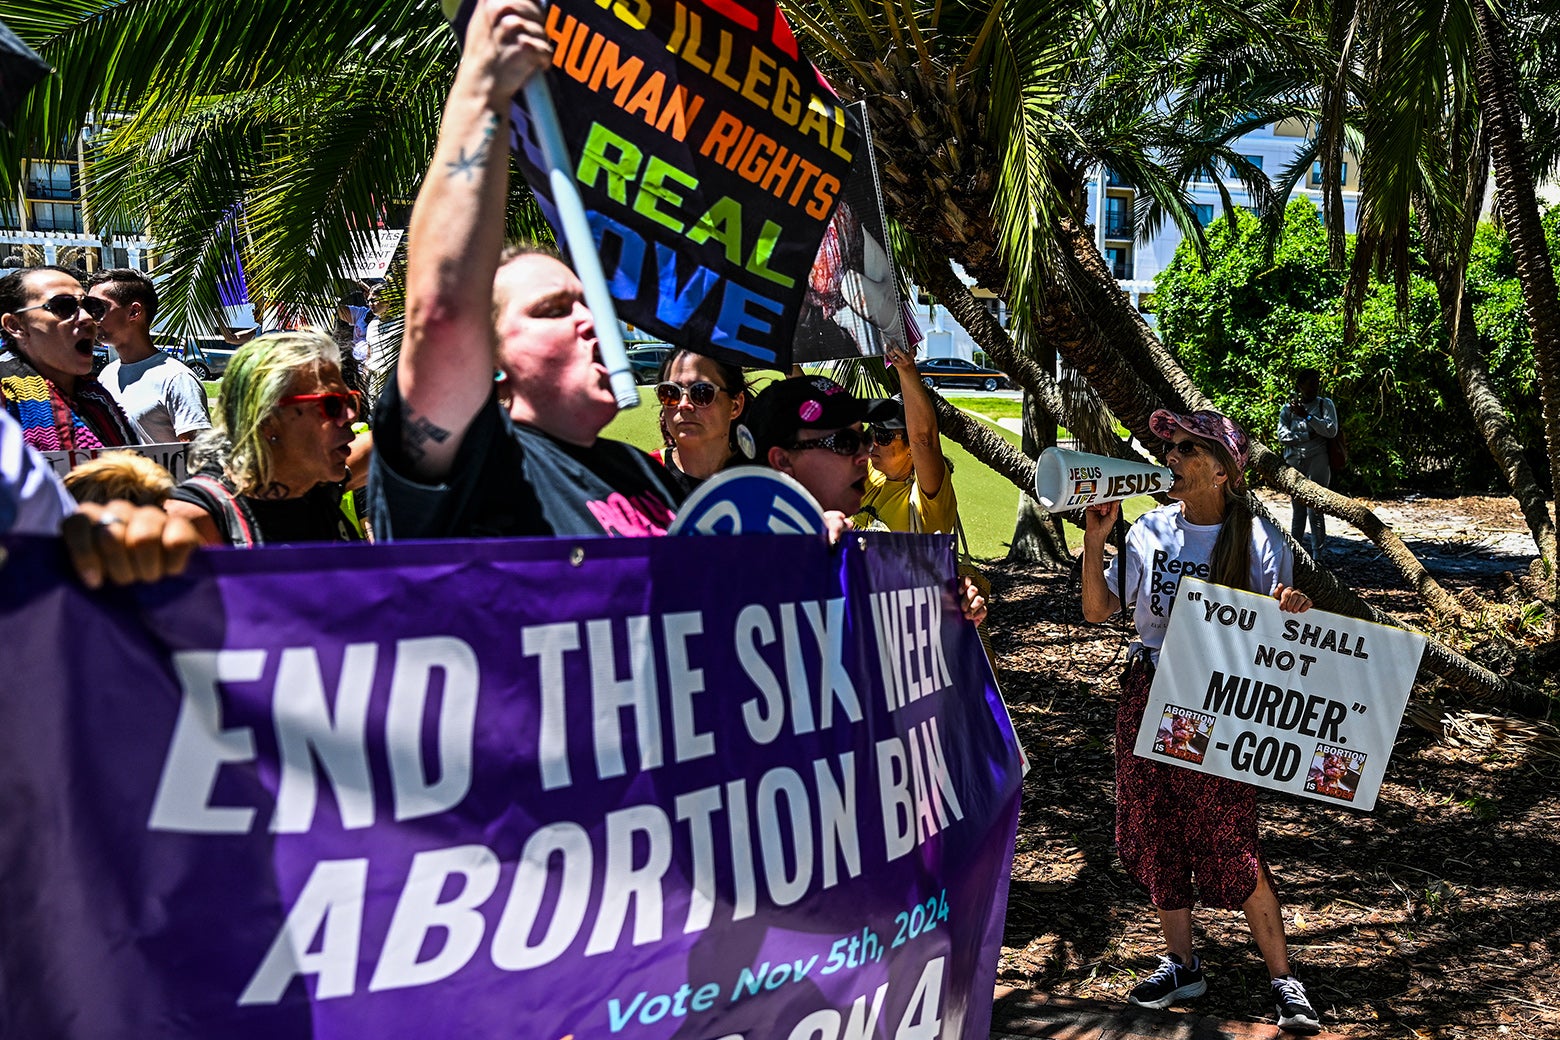 A group of anti-abortion activists protest near the "Rally for Our Freedom" to protect abortion rights in Orlando.